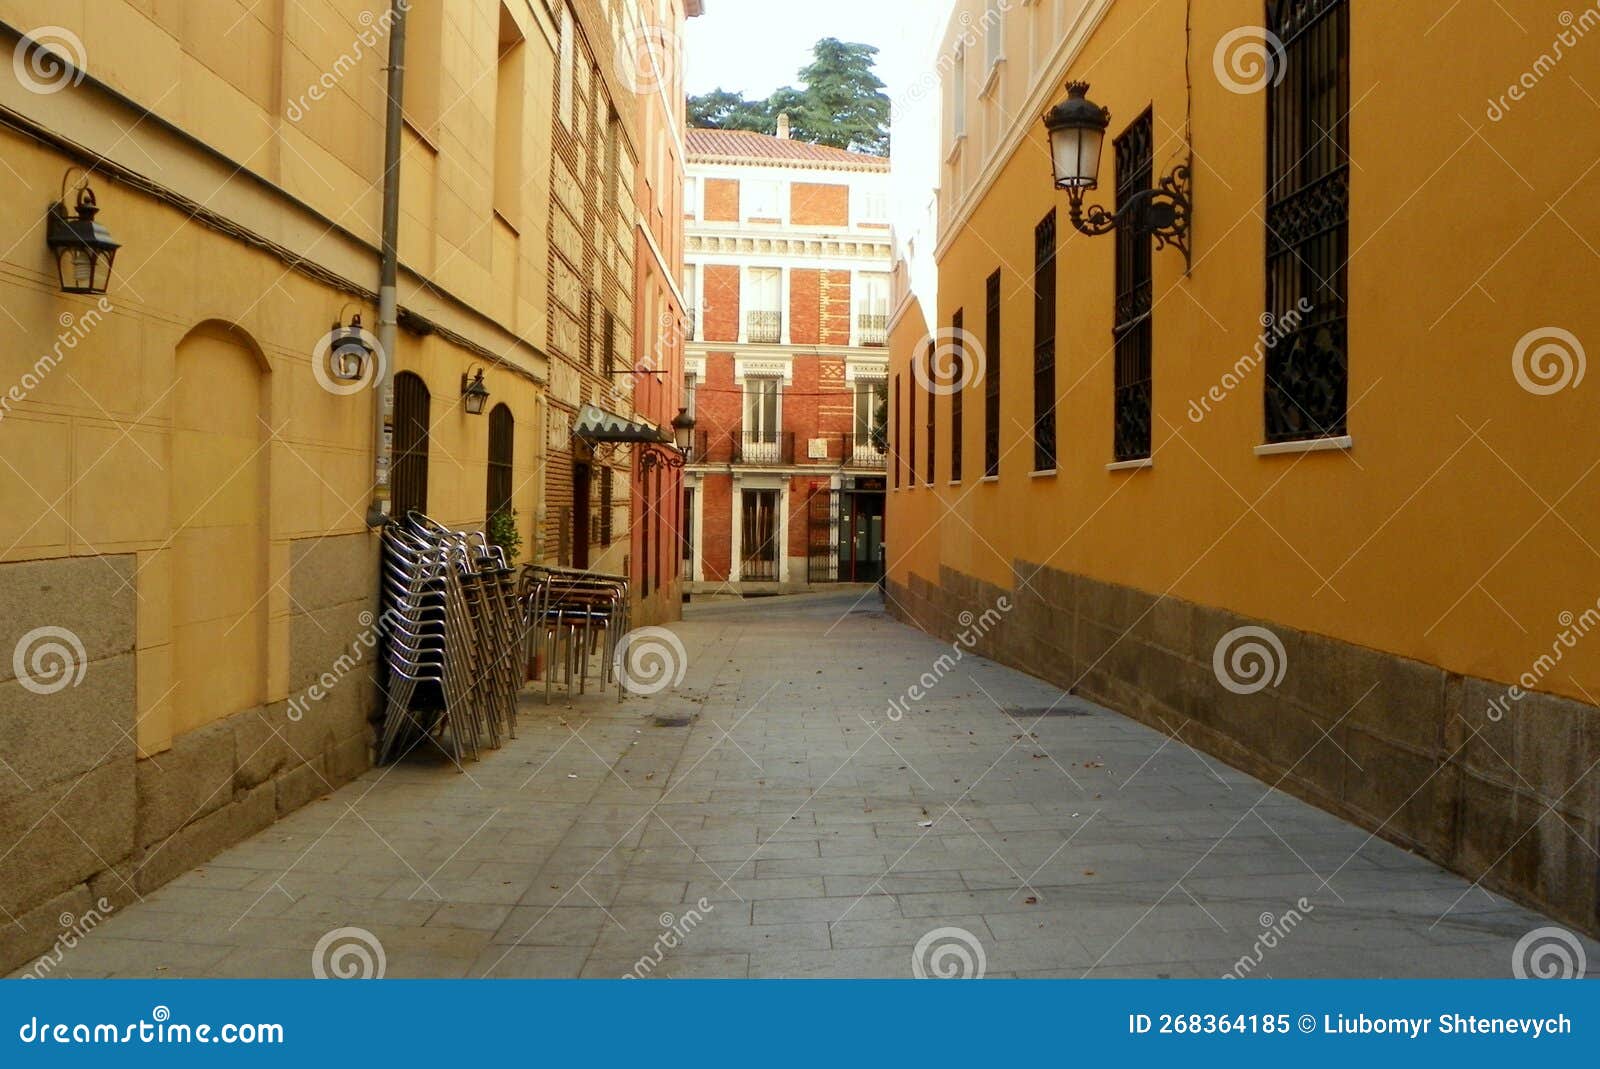 spain, madrid, 3 calle del biombo, narrow street and view of the red house